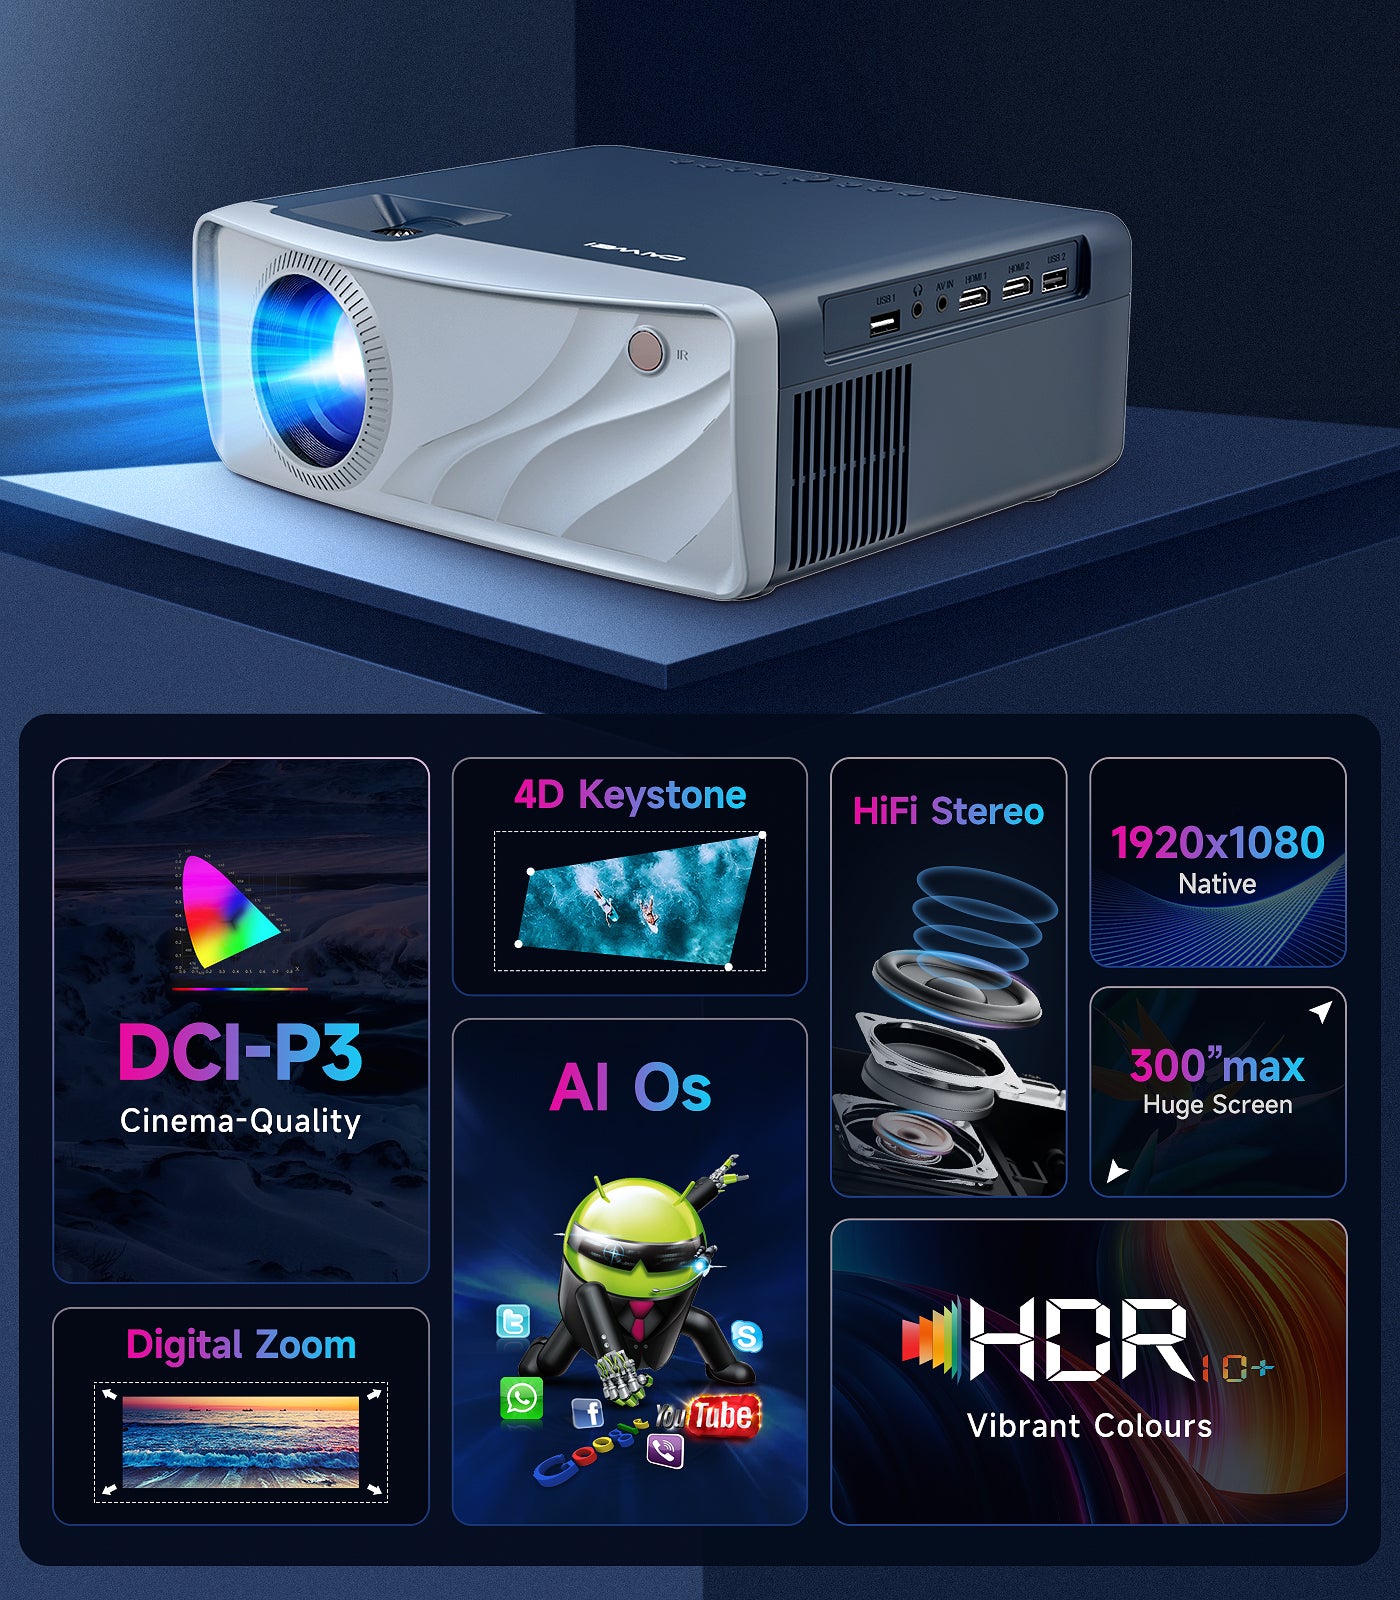 1080P Outdoor Projector, Portable iPhone Projector with WiFi and